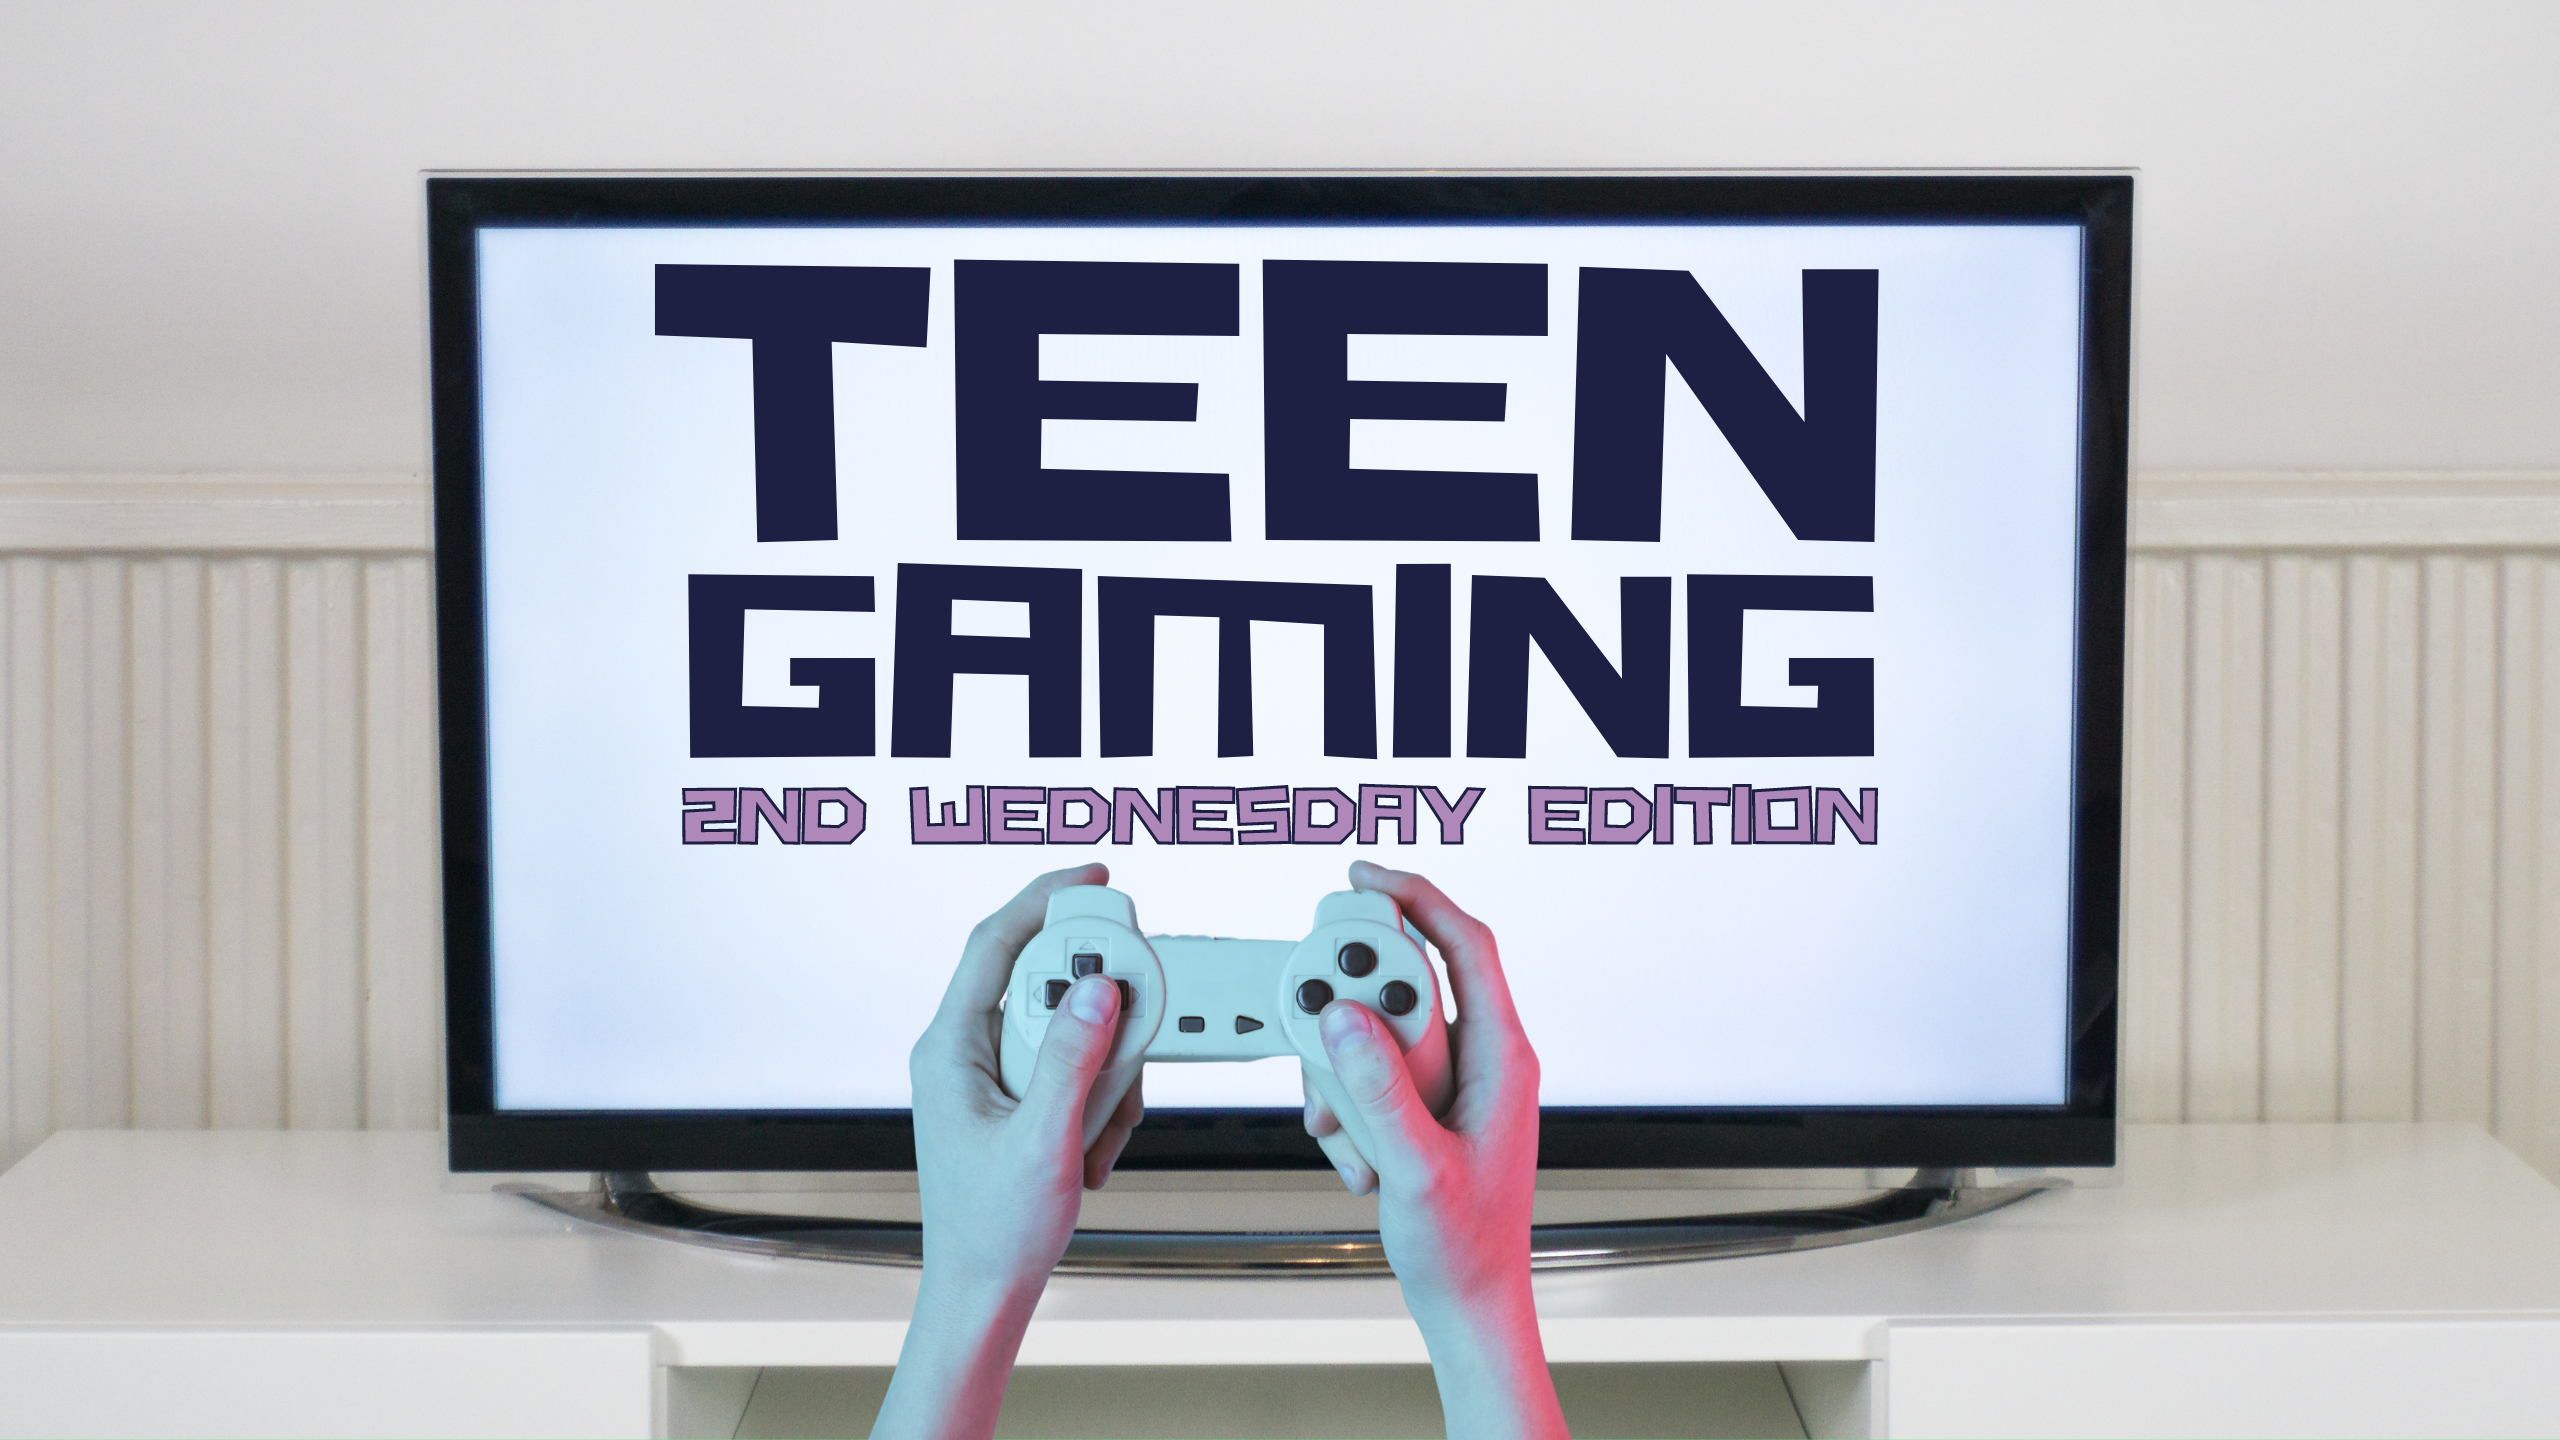 TV screen with words Teen Gaming displayed